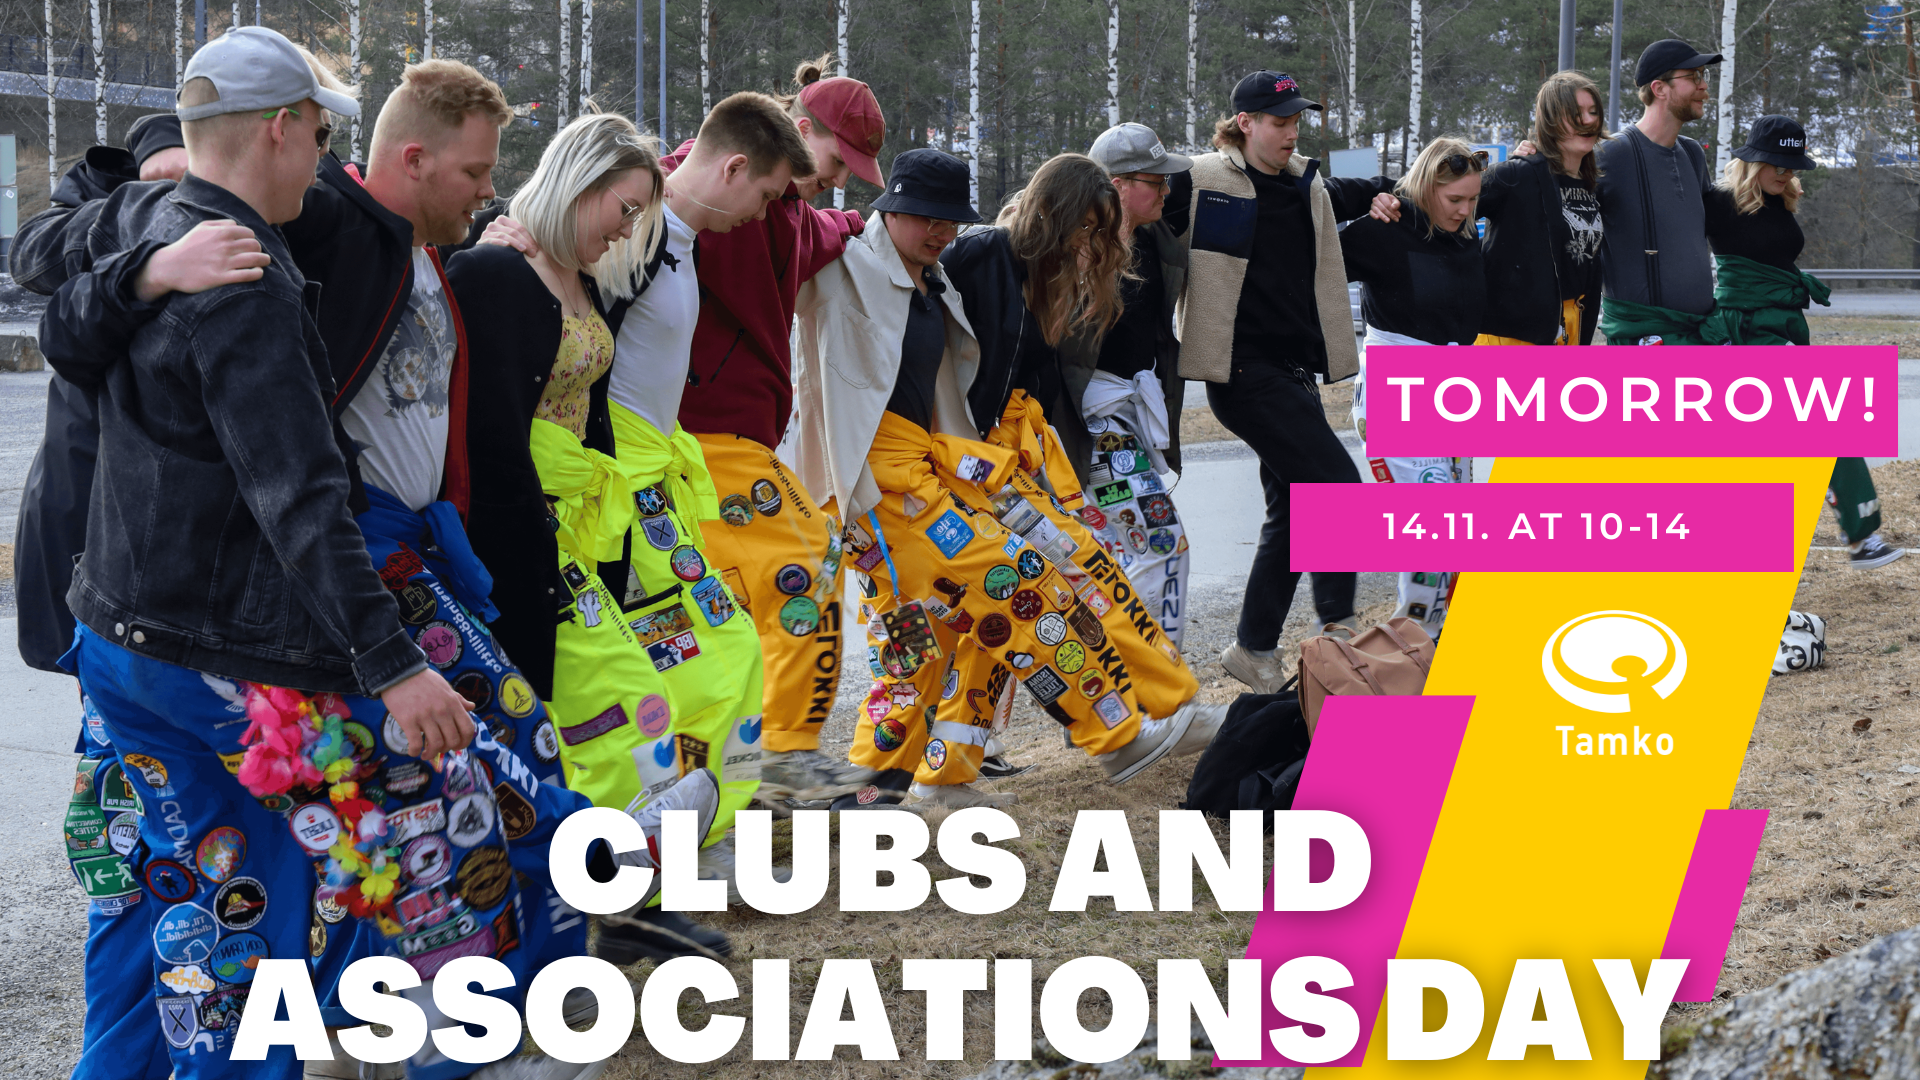 Clubs and associations day tomorrow!